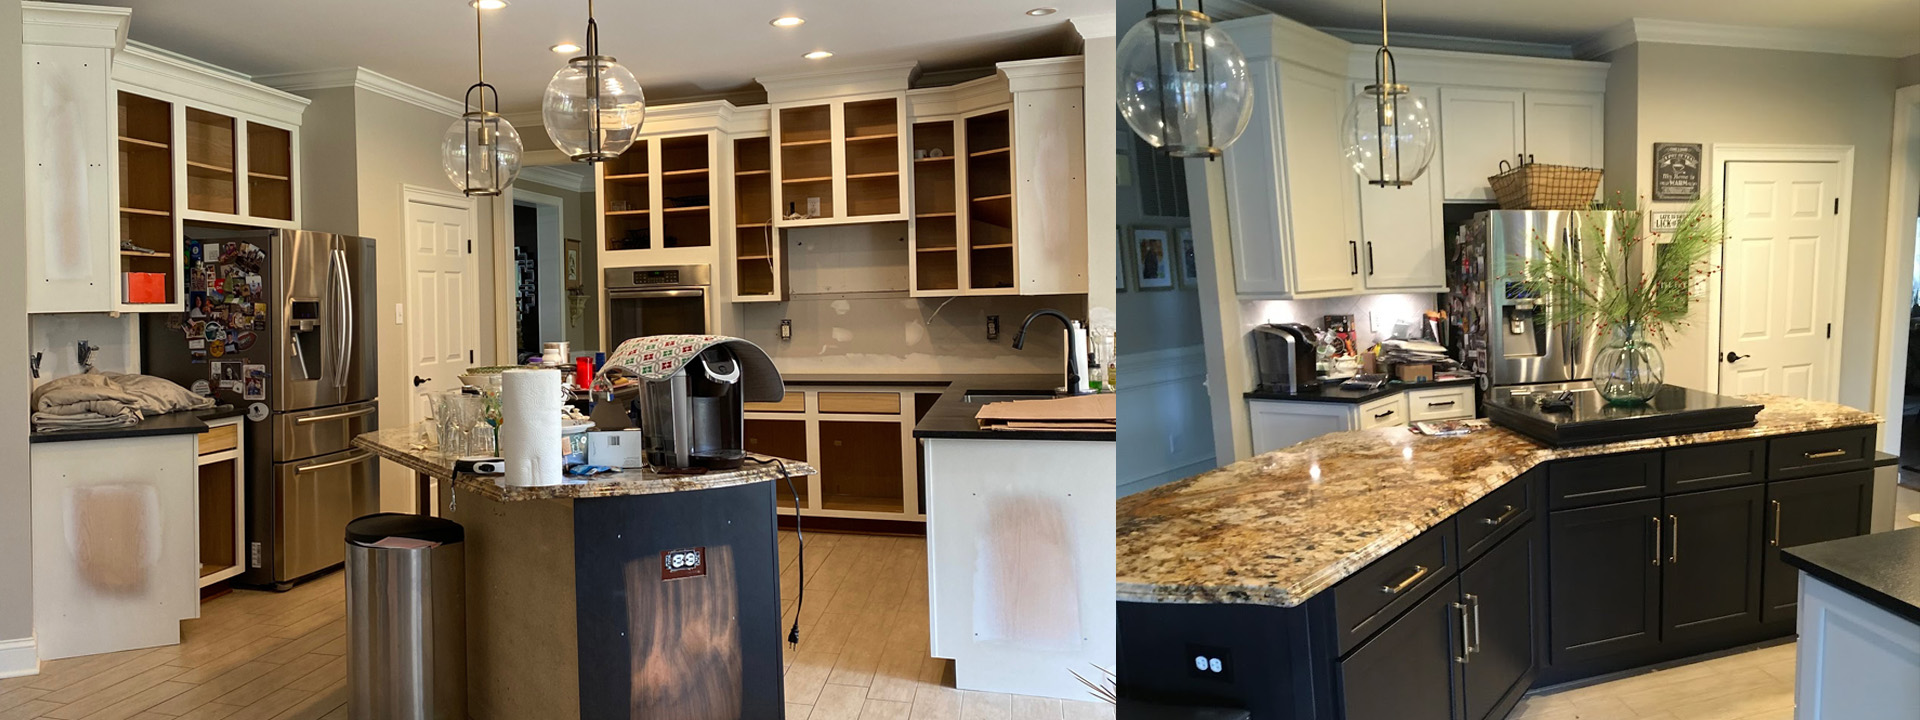 Custom Kitchen Cabinet Refacing with White Painted Finish on Cabinets and Dark Stained Island